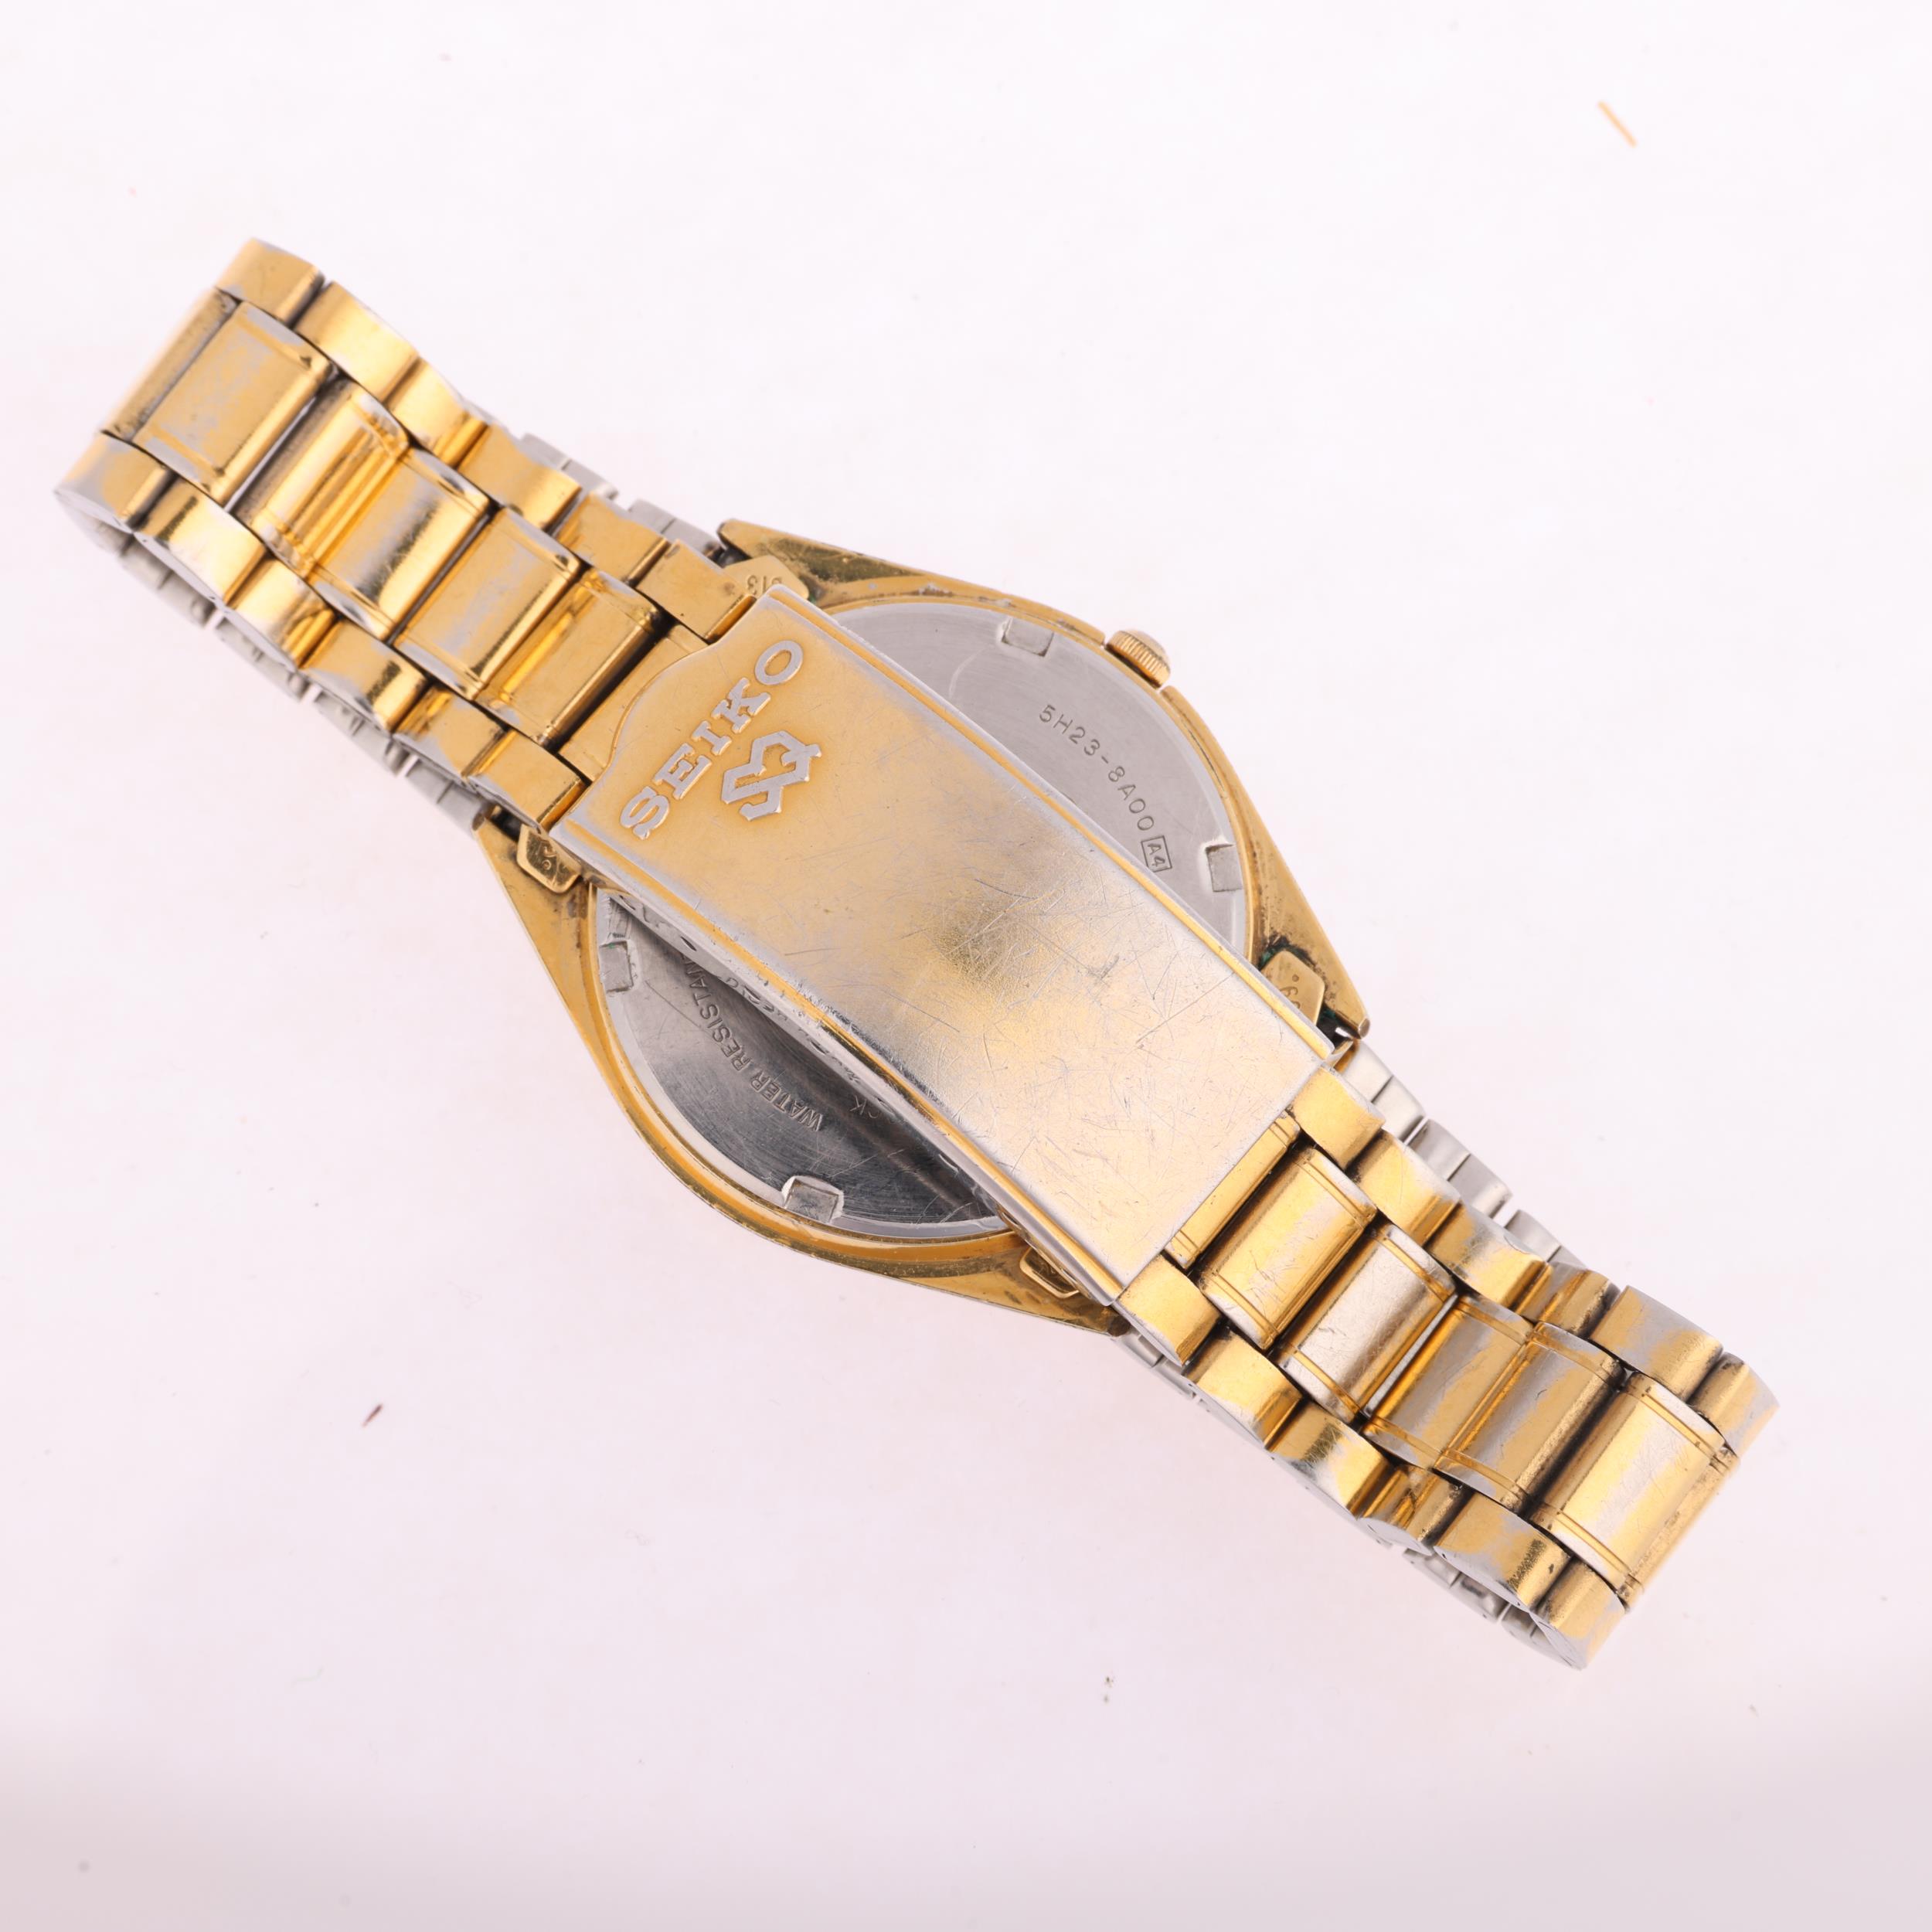 SEIKO - a gold plated stainless steel SQ quartz bracelet watch, ref. 5H23-8A00, champagne dial - Image 3 of 5